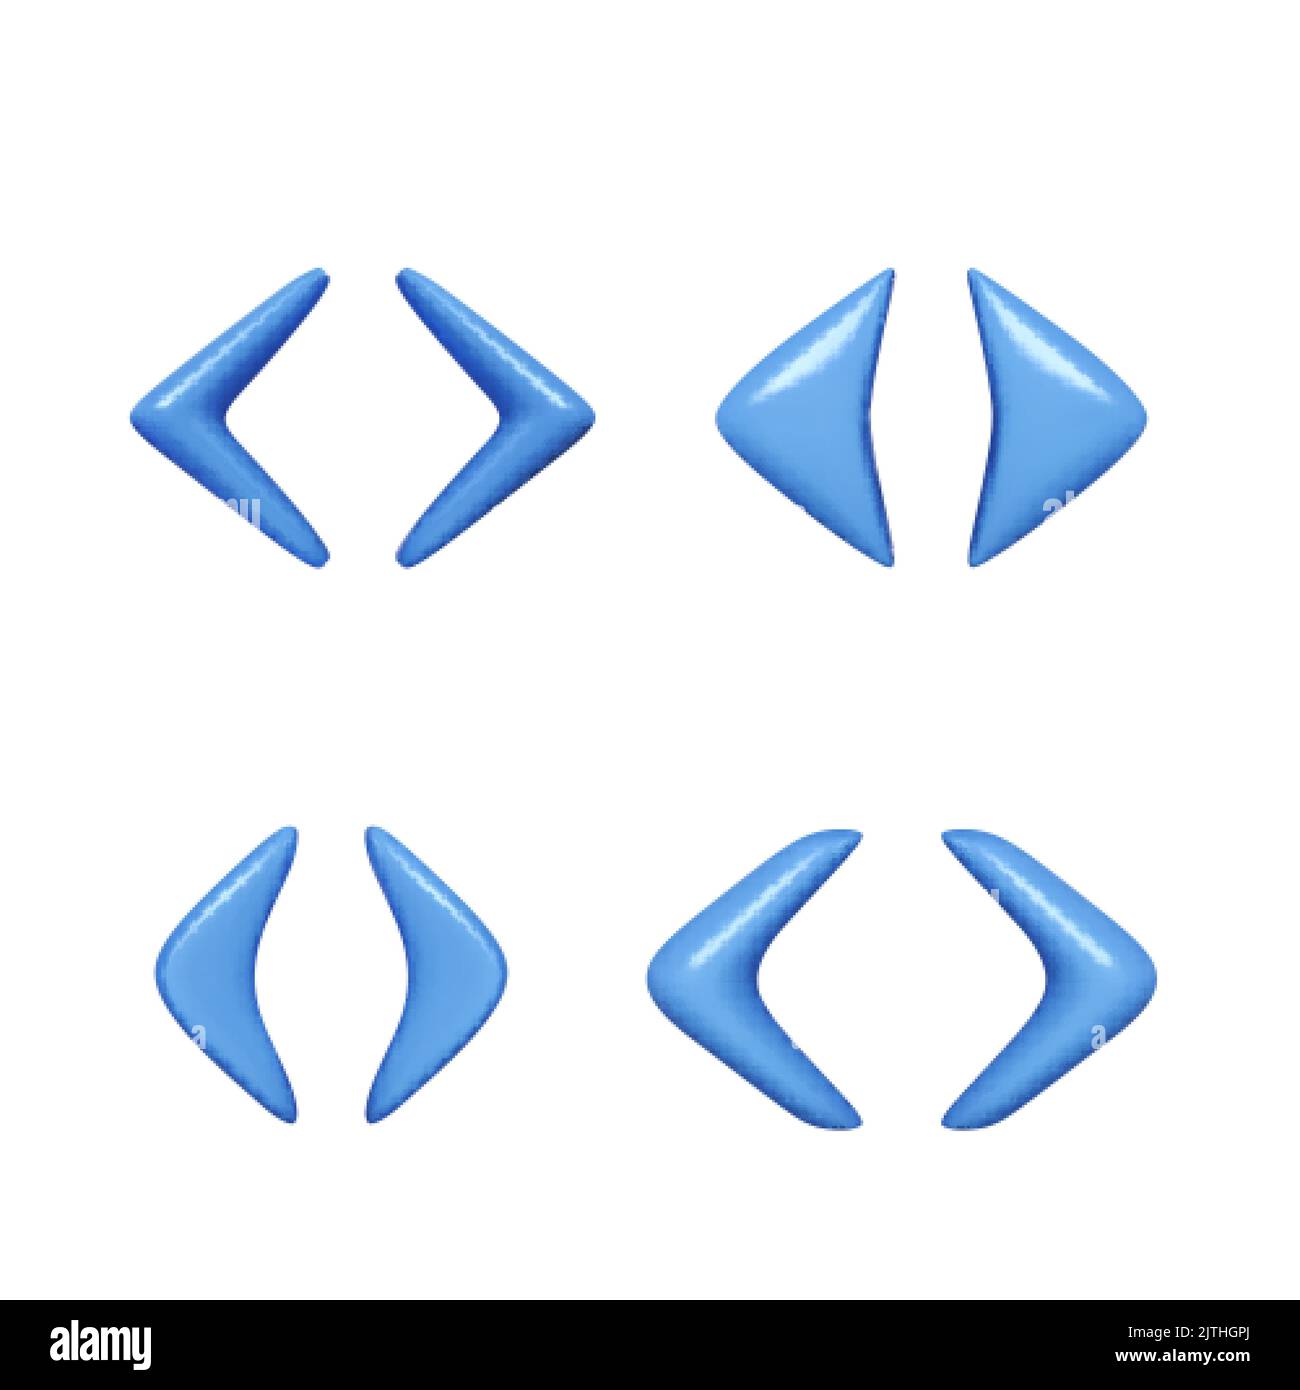 Arrow 3d button set. Arrow icon set blue color on white background. Isolated interface line symbol for app. Application sign element collection. Vecto Stock Vector